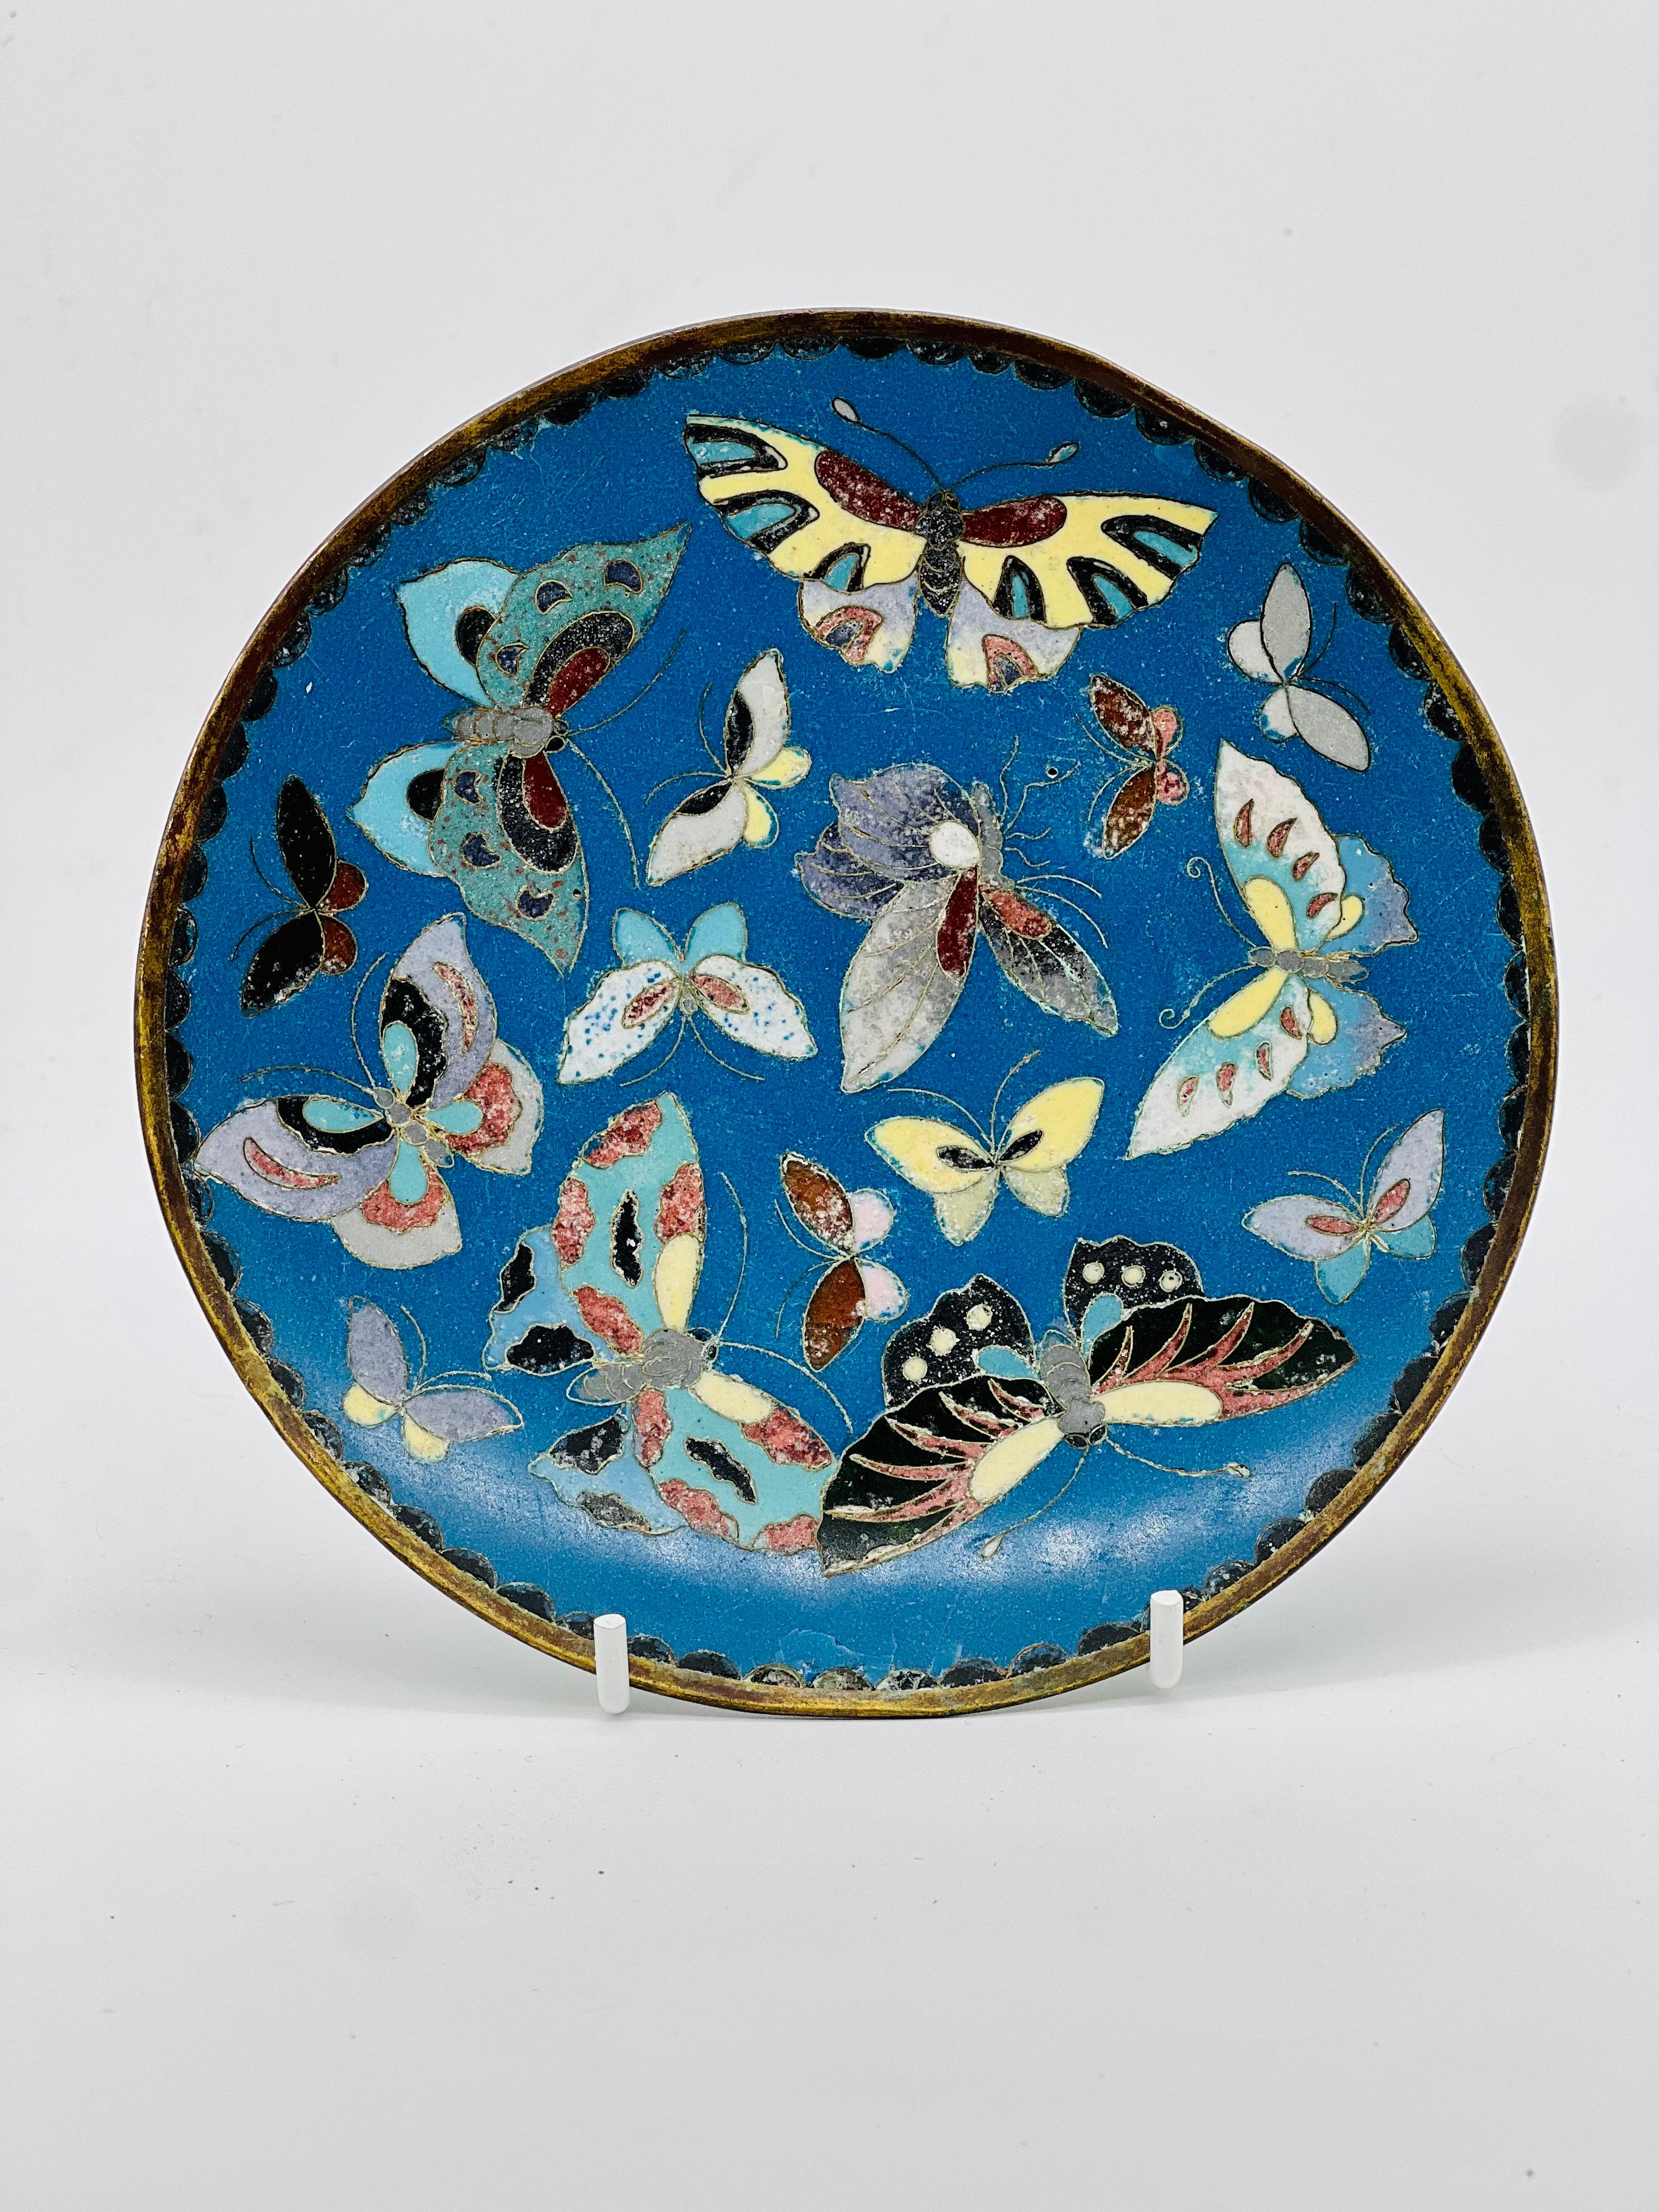 A fine Antique Japanese Cloisonne enamel butterfly Plate. Meiji Period.


Worked in silver wire of varying gauge with many colorful butterflies, reserved on a blue ground. The bottom with a pale green enamel.


Size: 15 cm in